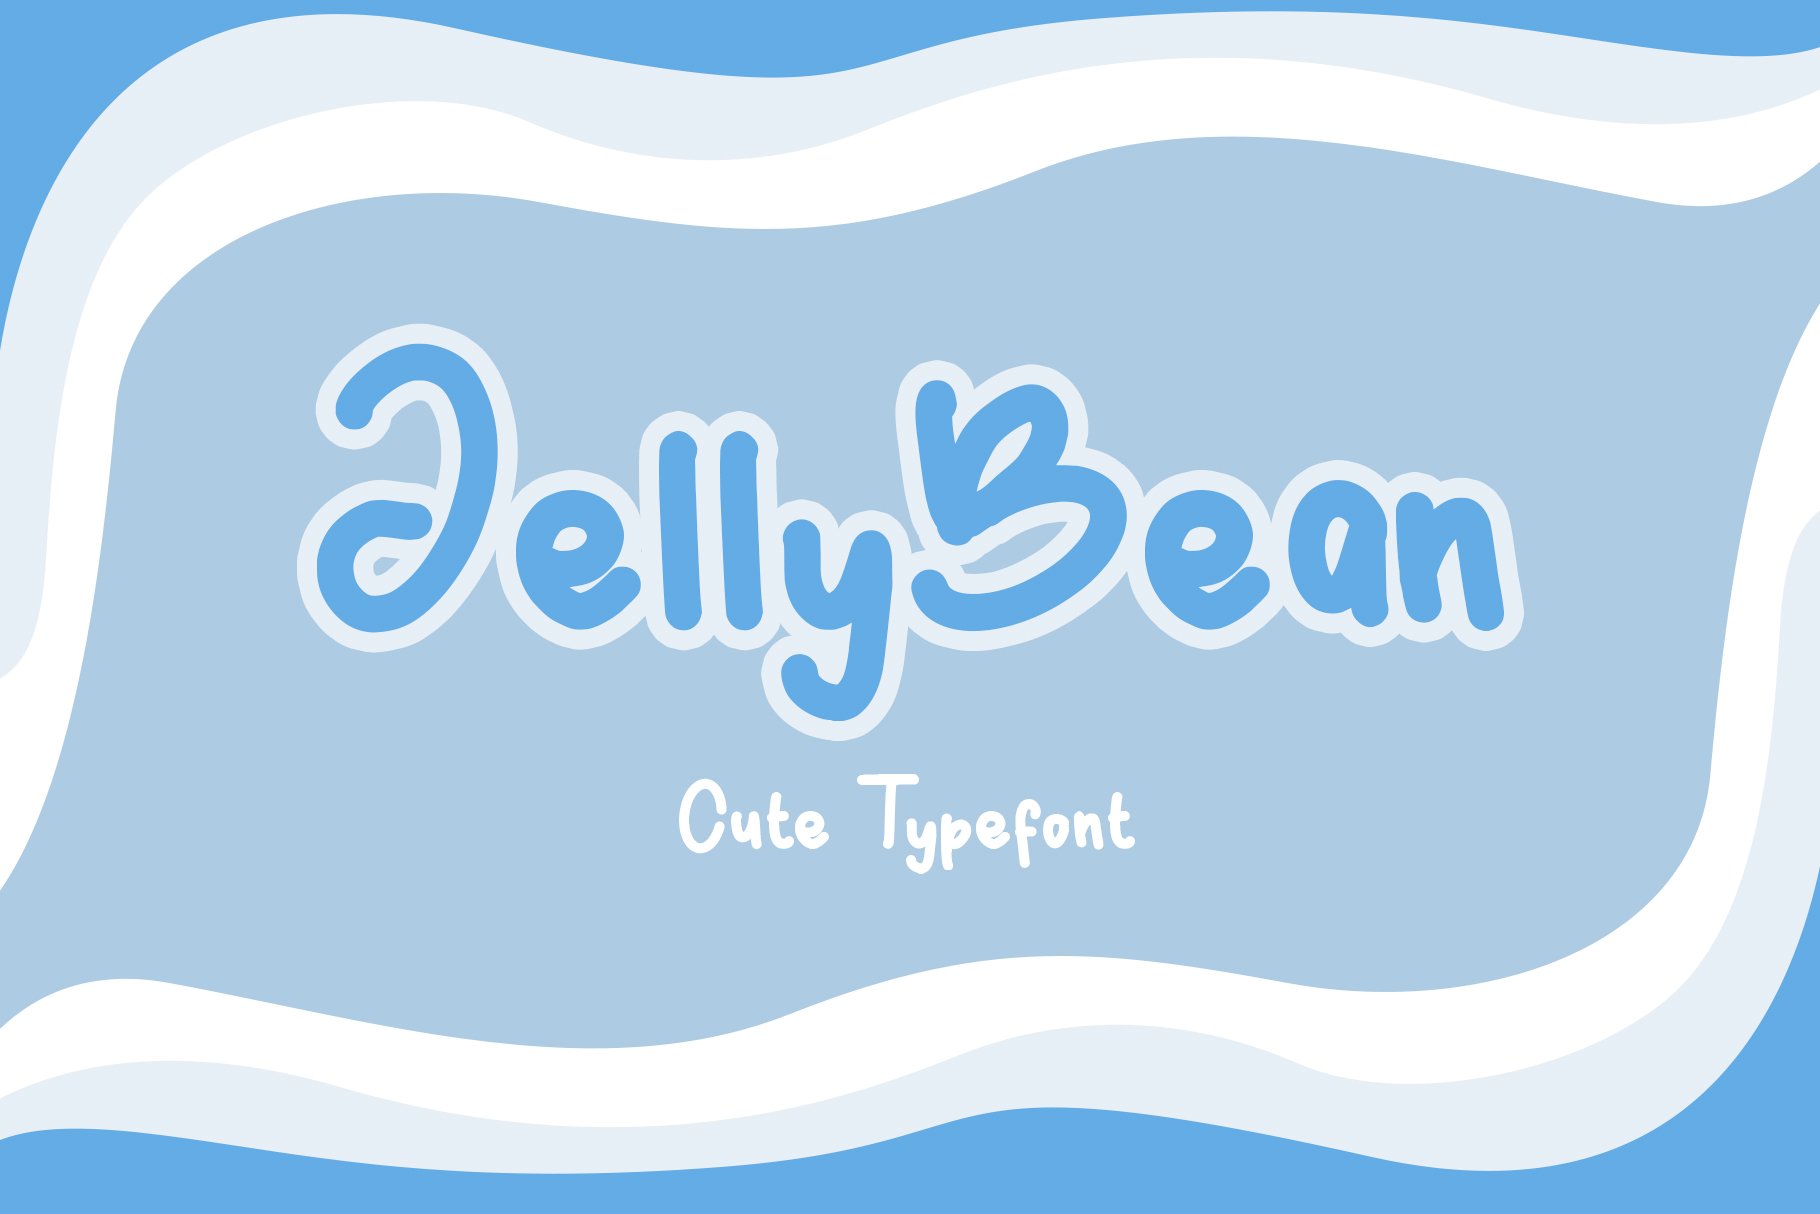 JellyBean || Cute & Playful Fonts cover image.